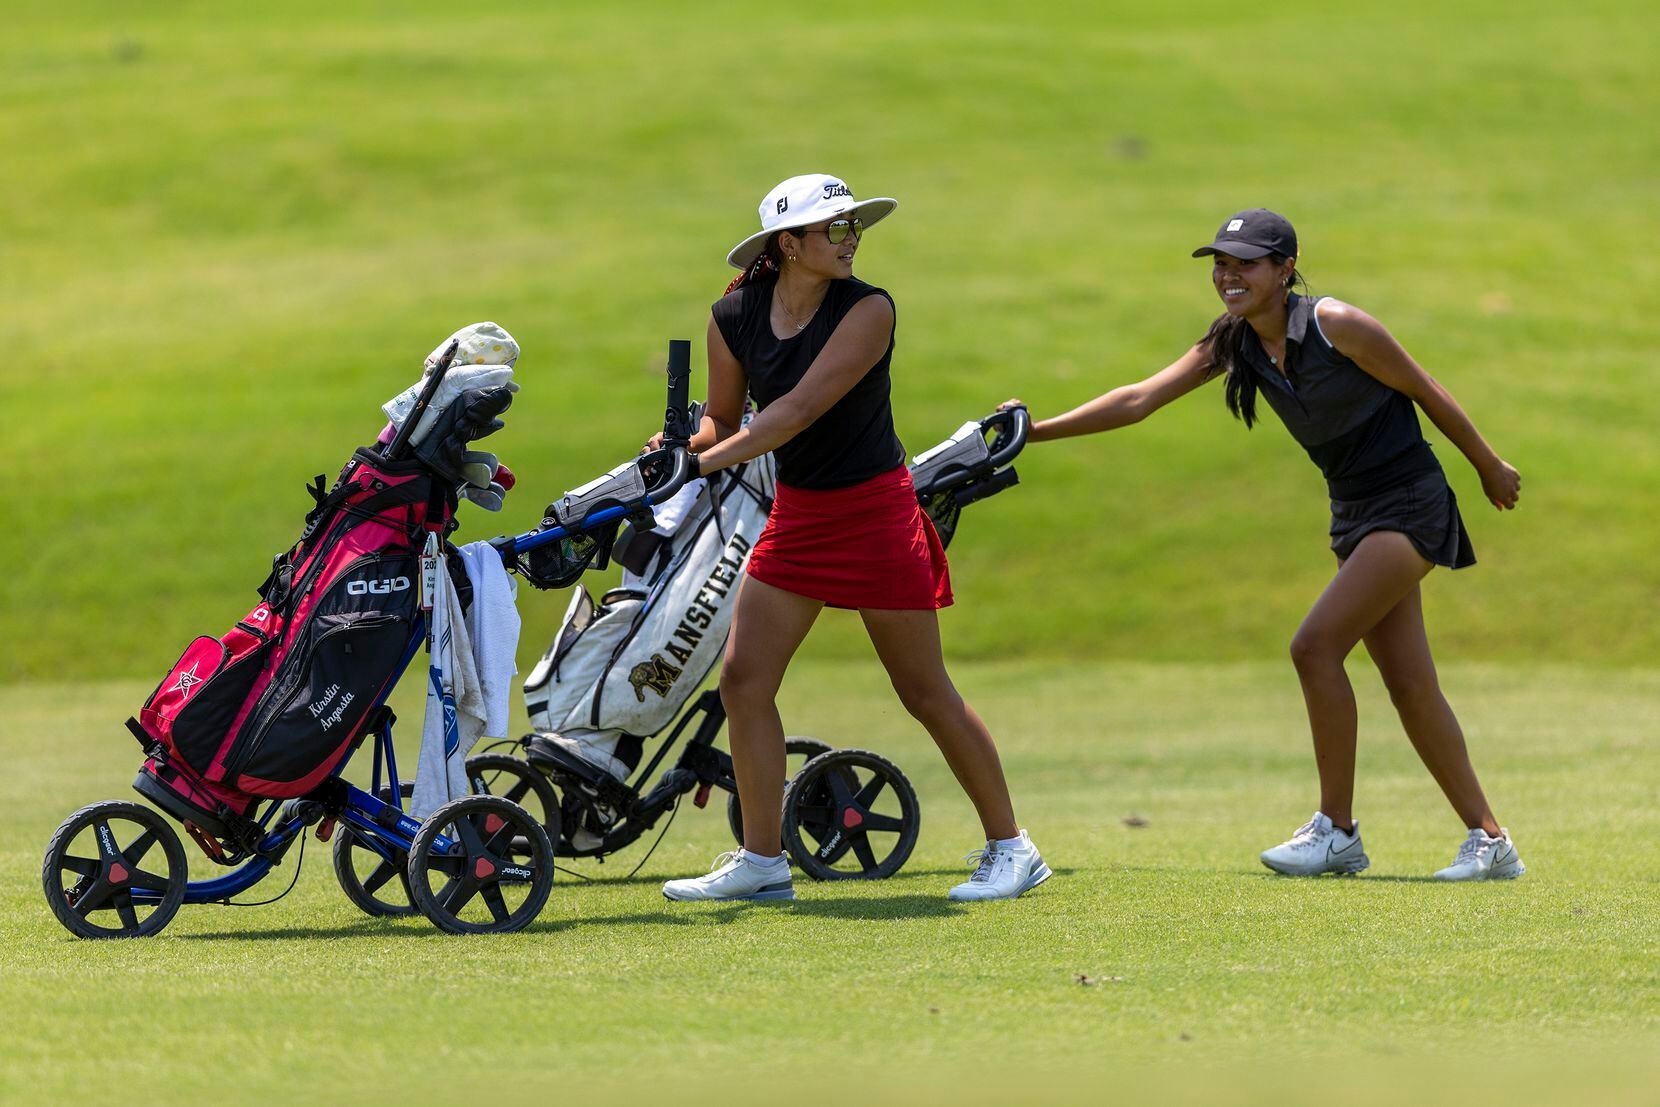 Coppell’s Kristin Angosta, left, and Mansfield’s Madison Le walk to their shots on the 7th...